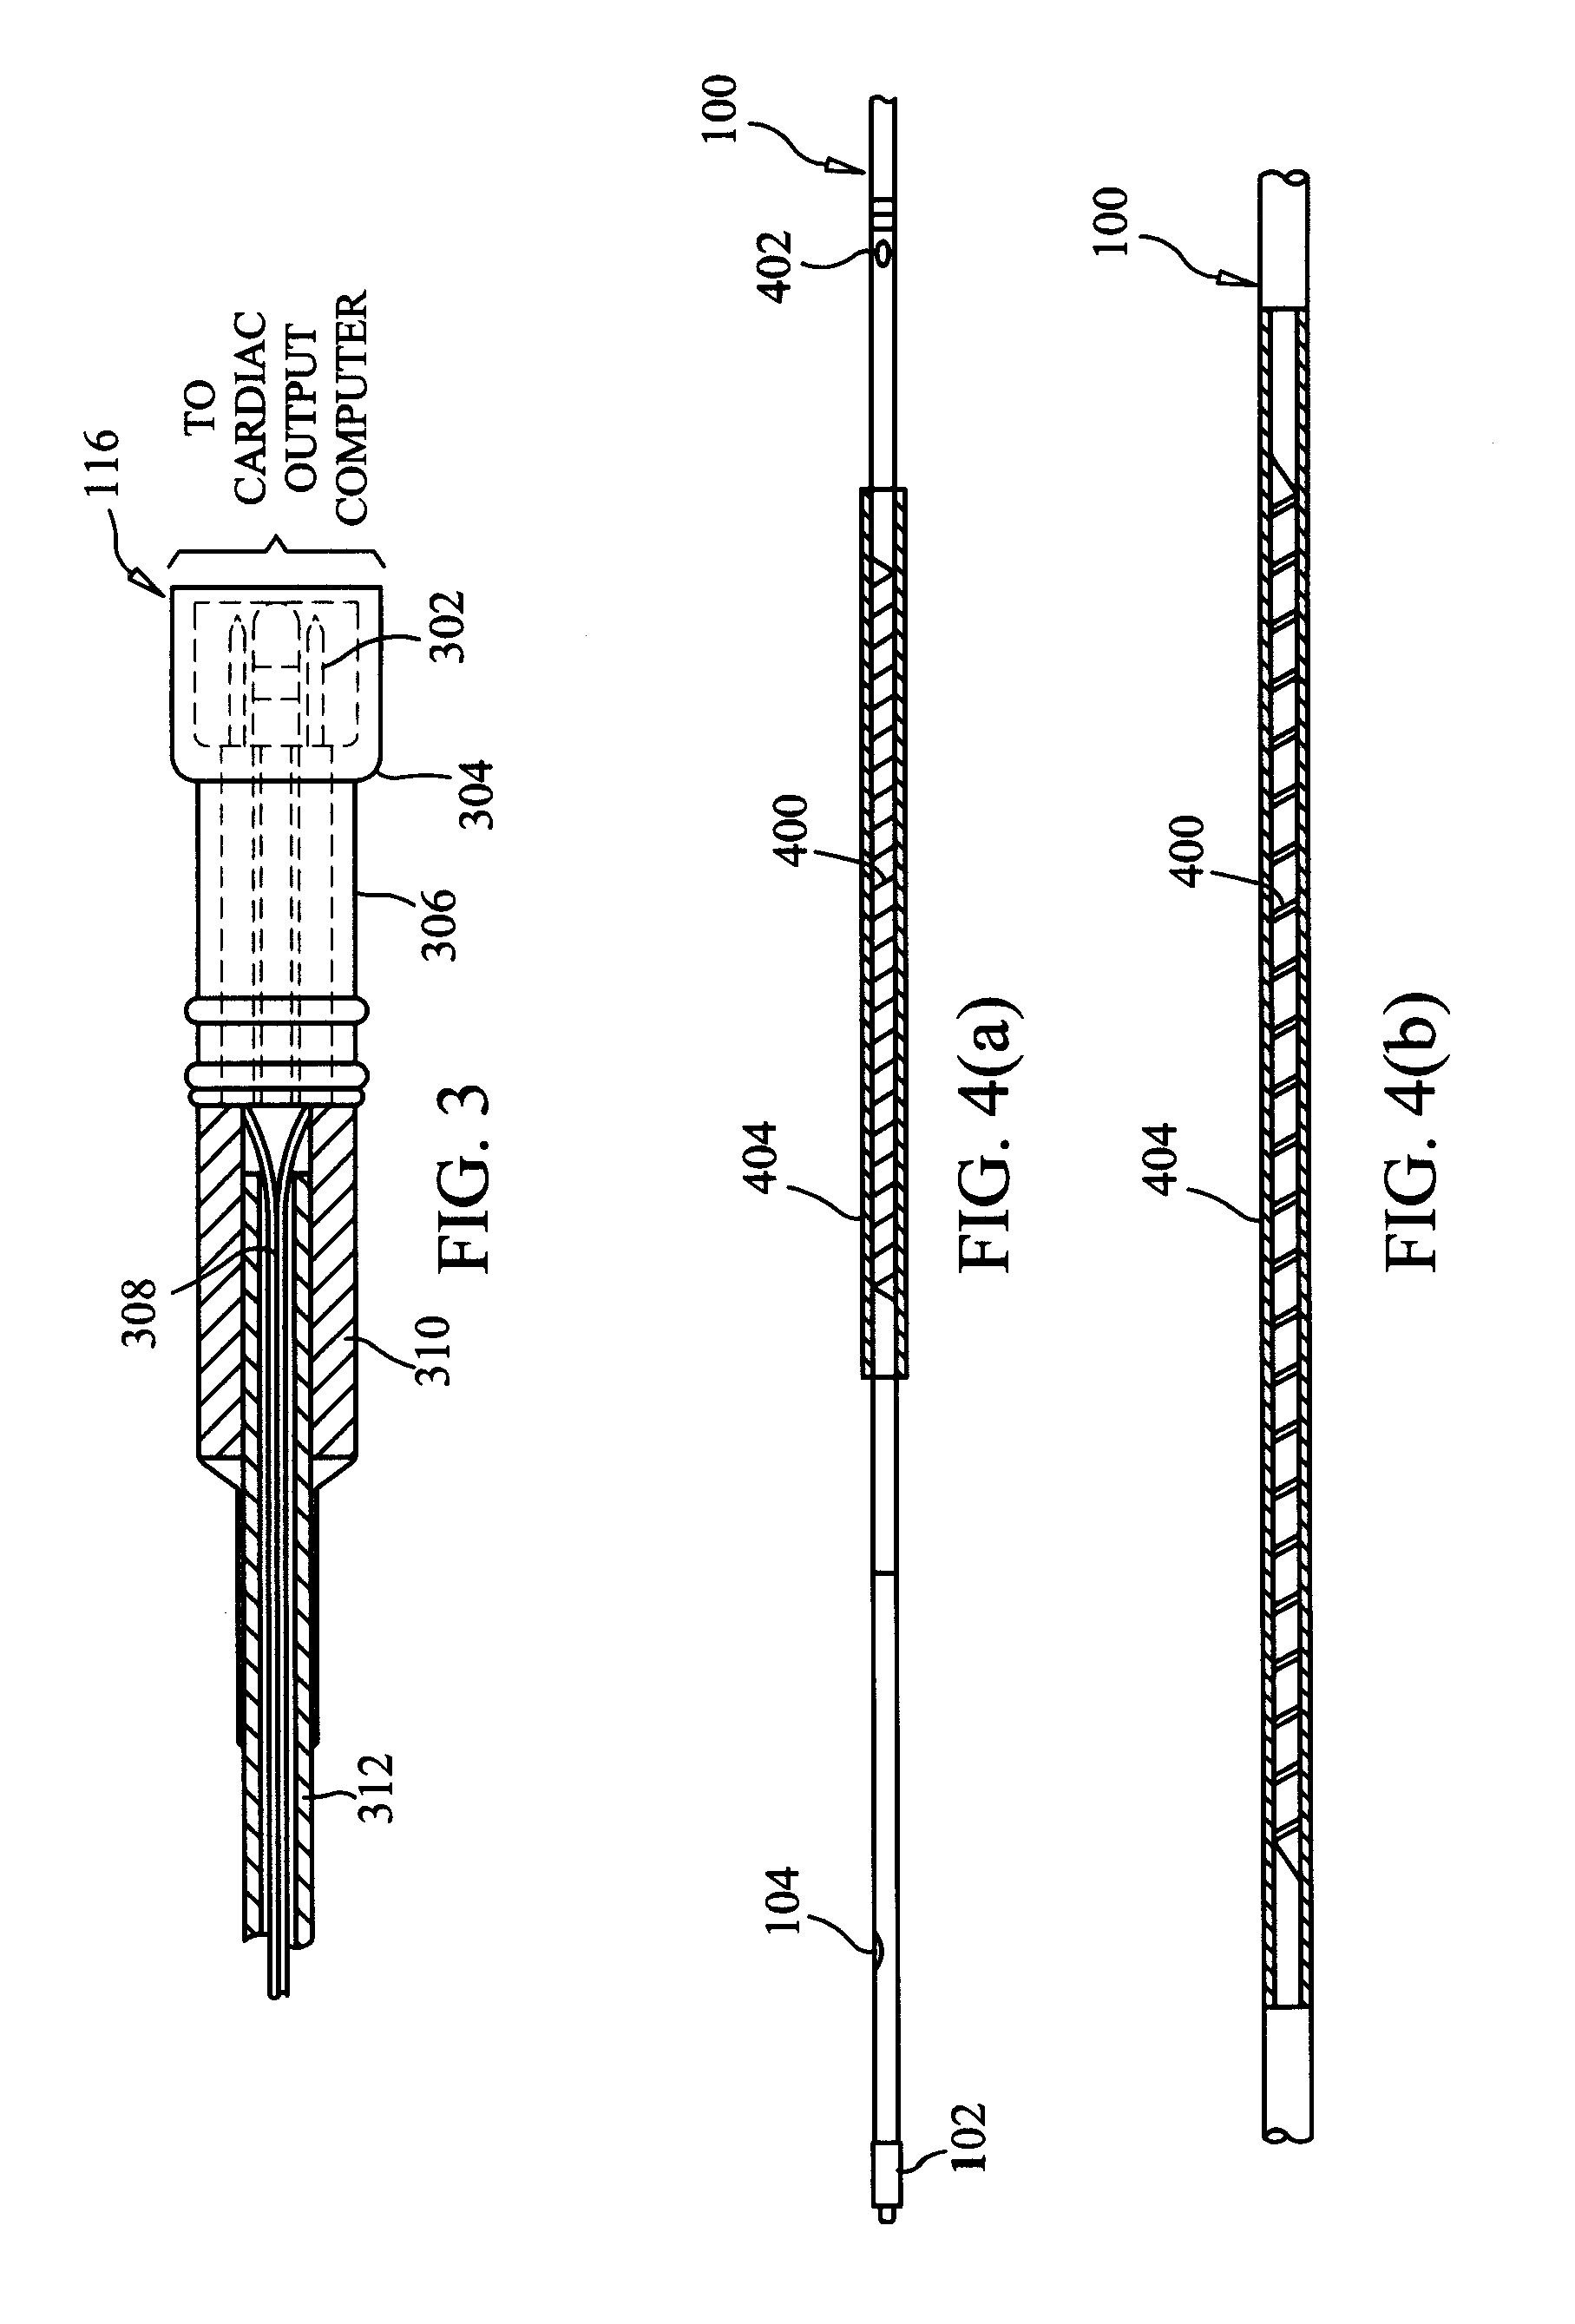 Thermodilution catheter having a safe, flexible heating element